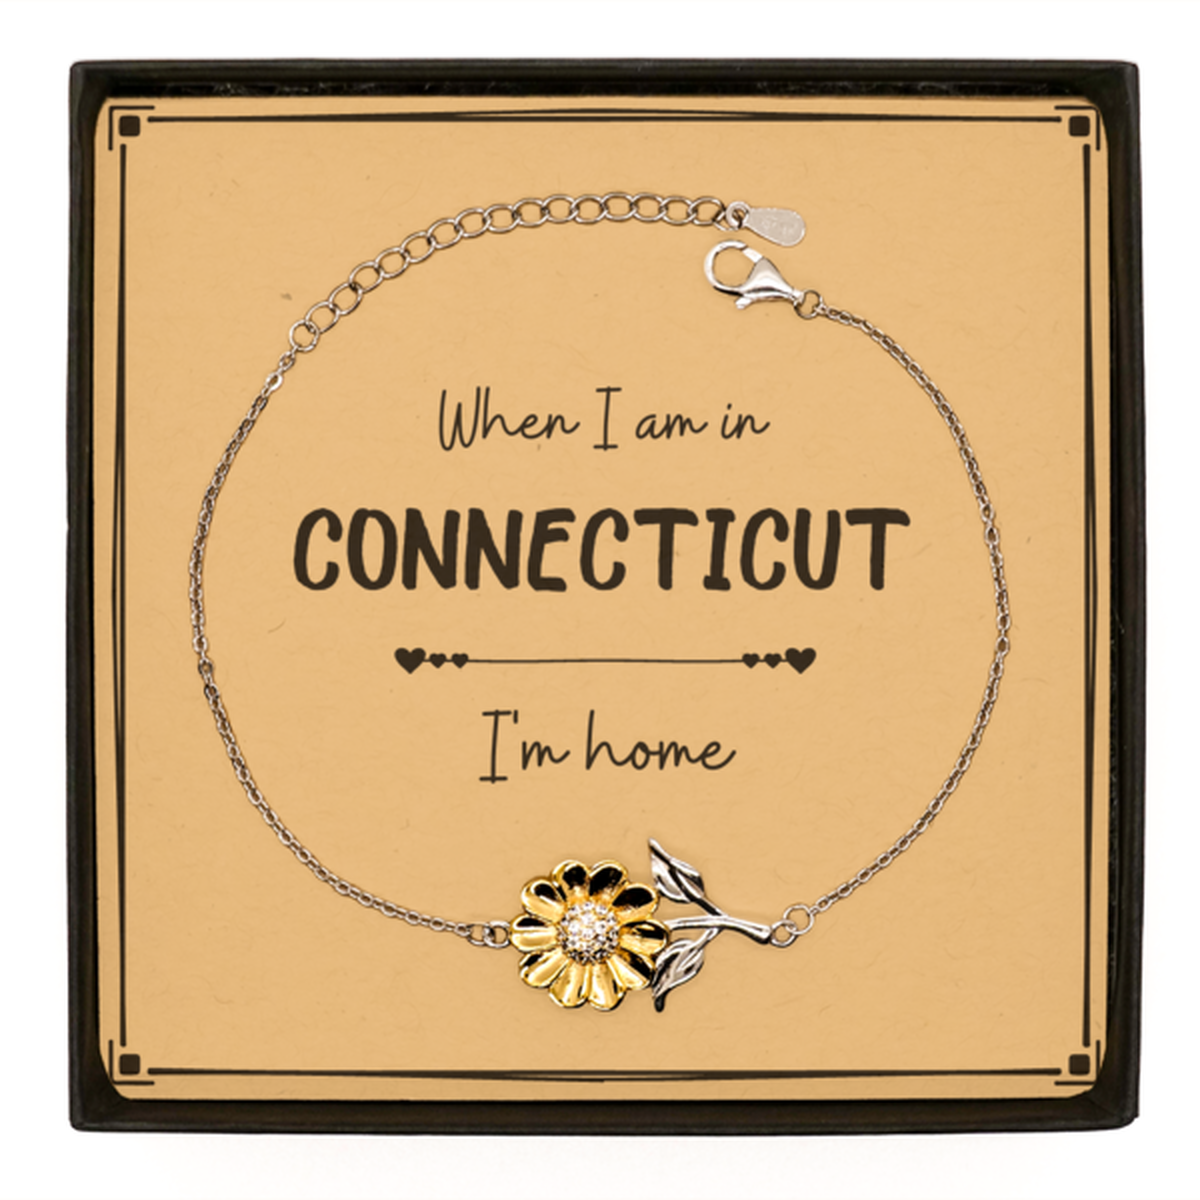 When I am in Connecticut I'm home Sunflower Bracelet, Message Card Gifts For Connecticut, State Connecticut Birthday Gifts for Friends Coworker